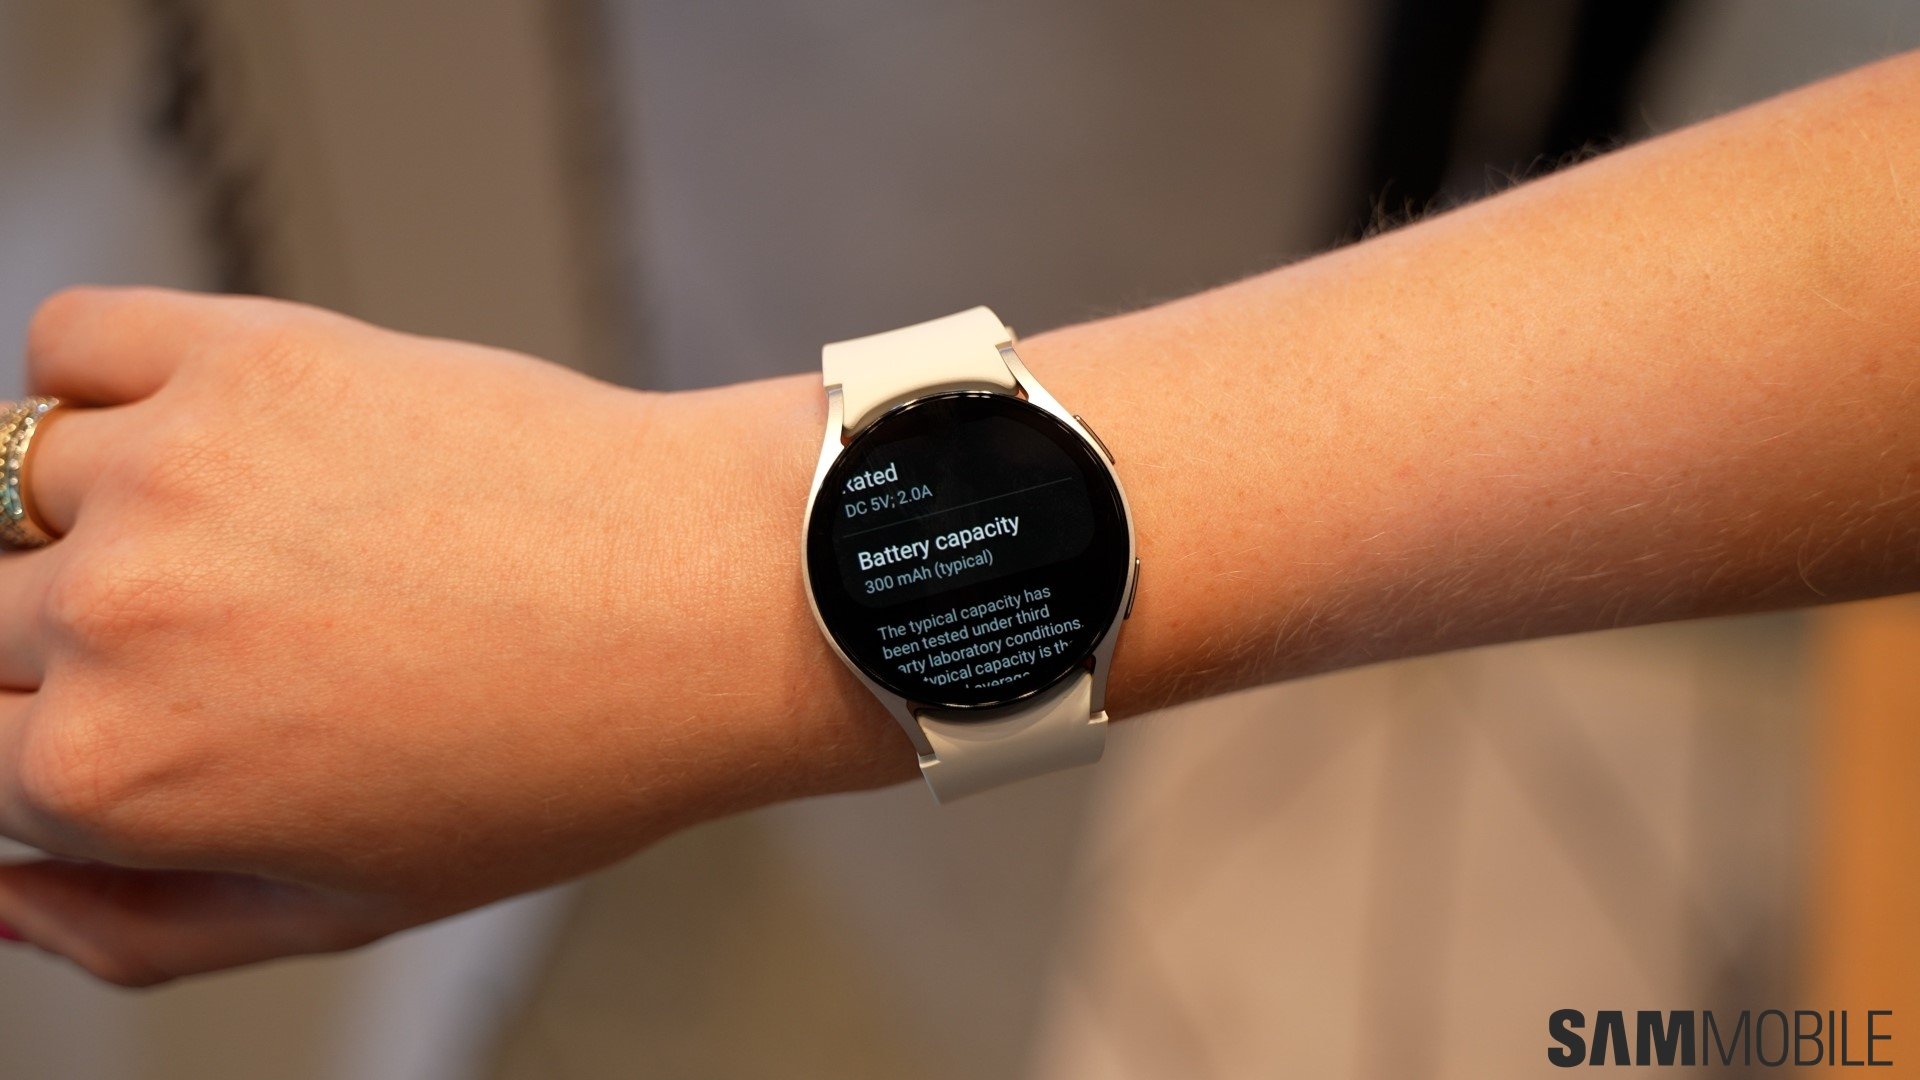 Samsung Galaxy Watch Active 2: First Run Impressions Video Up!